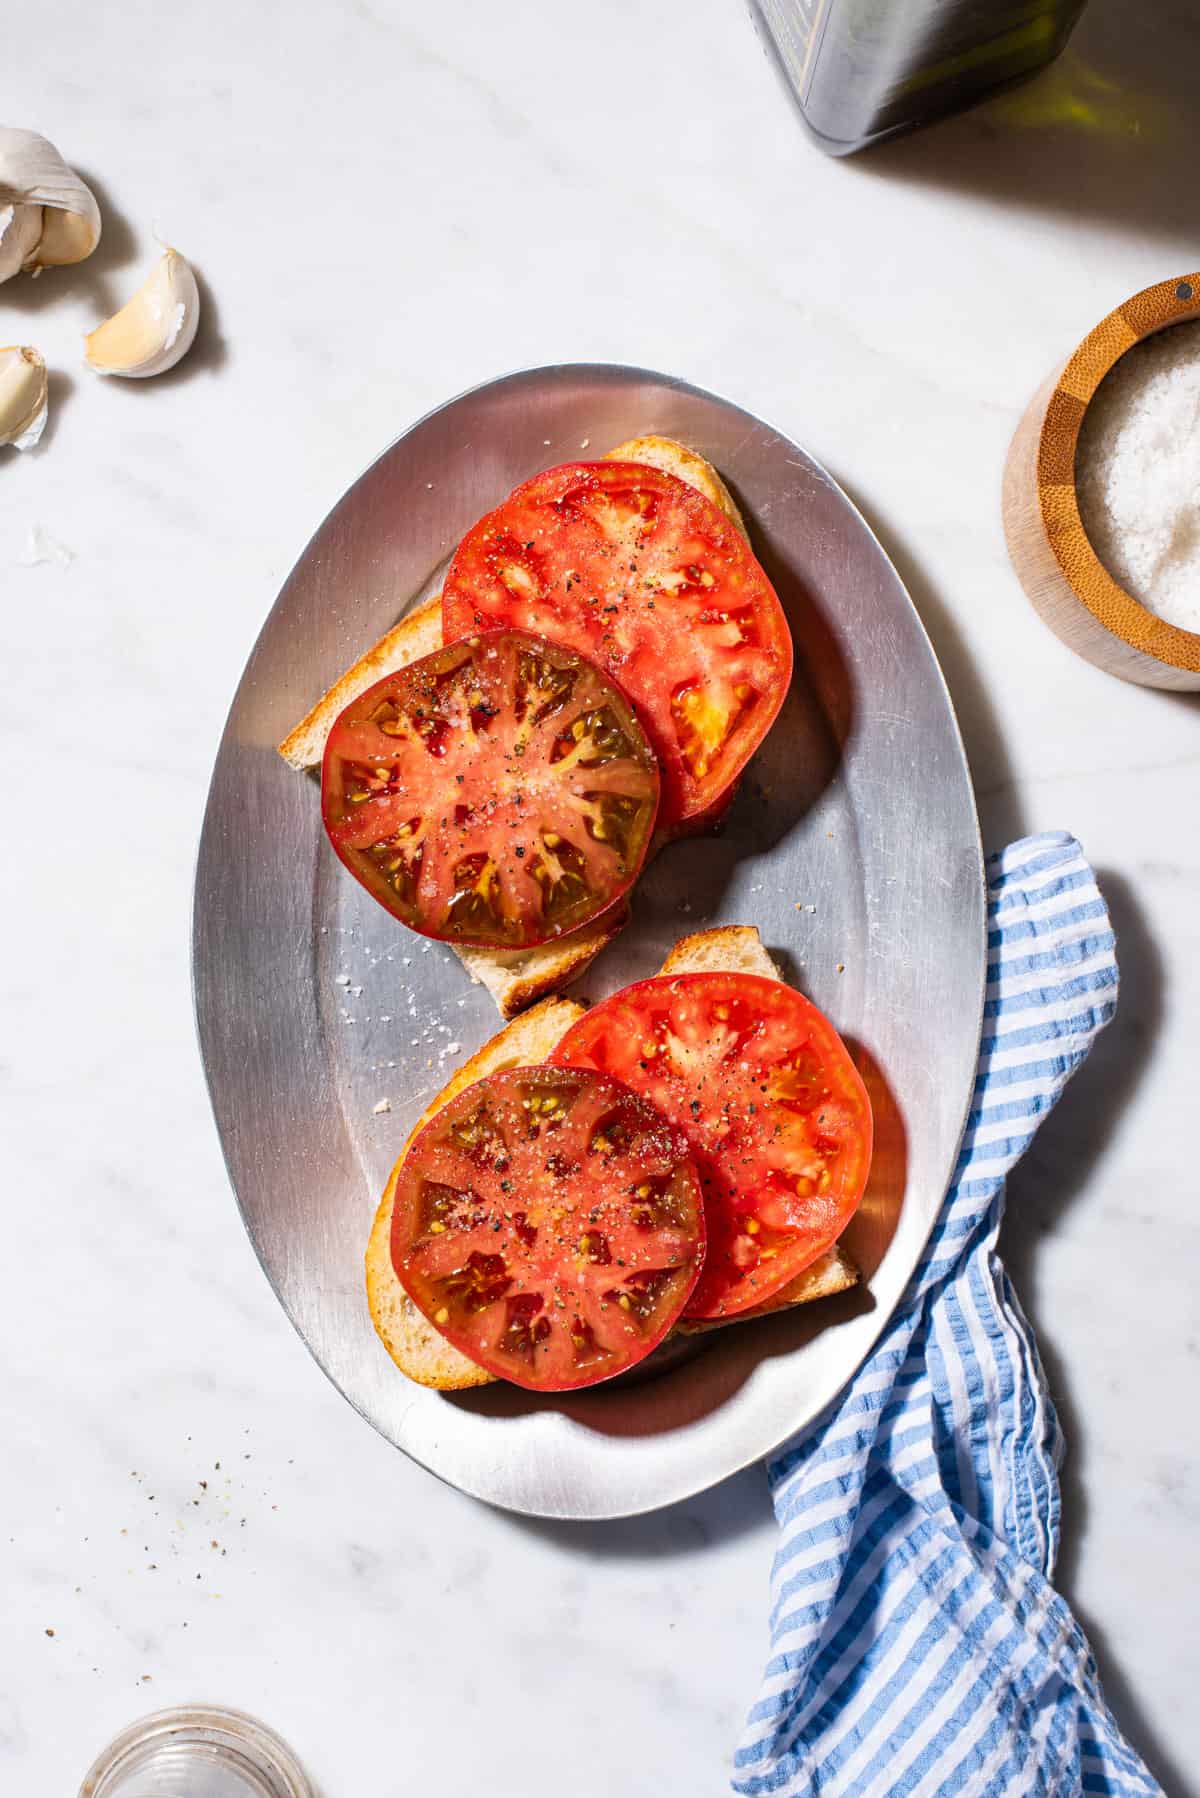 2 pieces of garlicky heirloom tomato toast on a sizzle plate next to a blue striped towel.